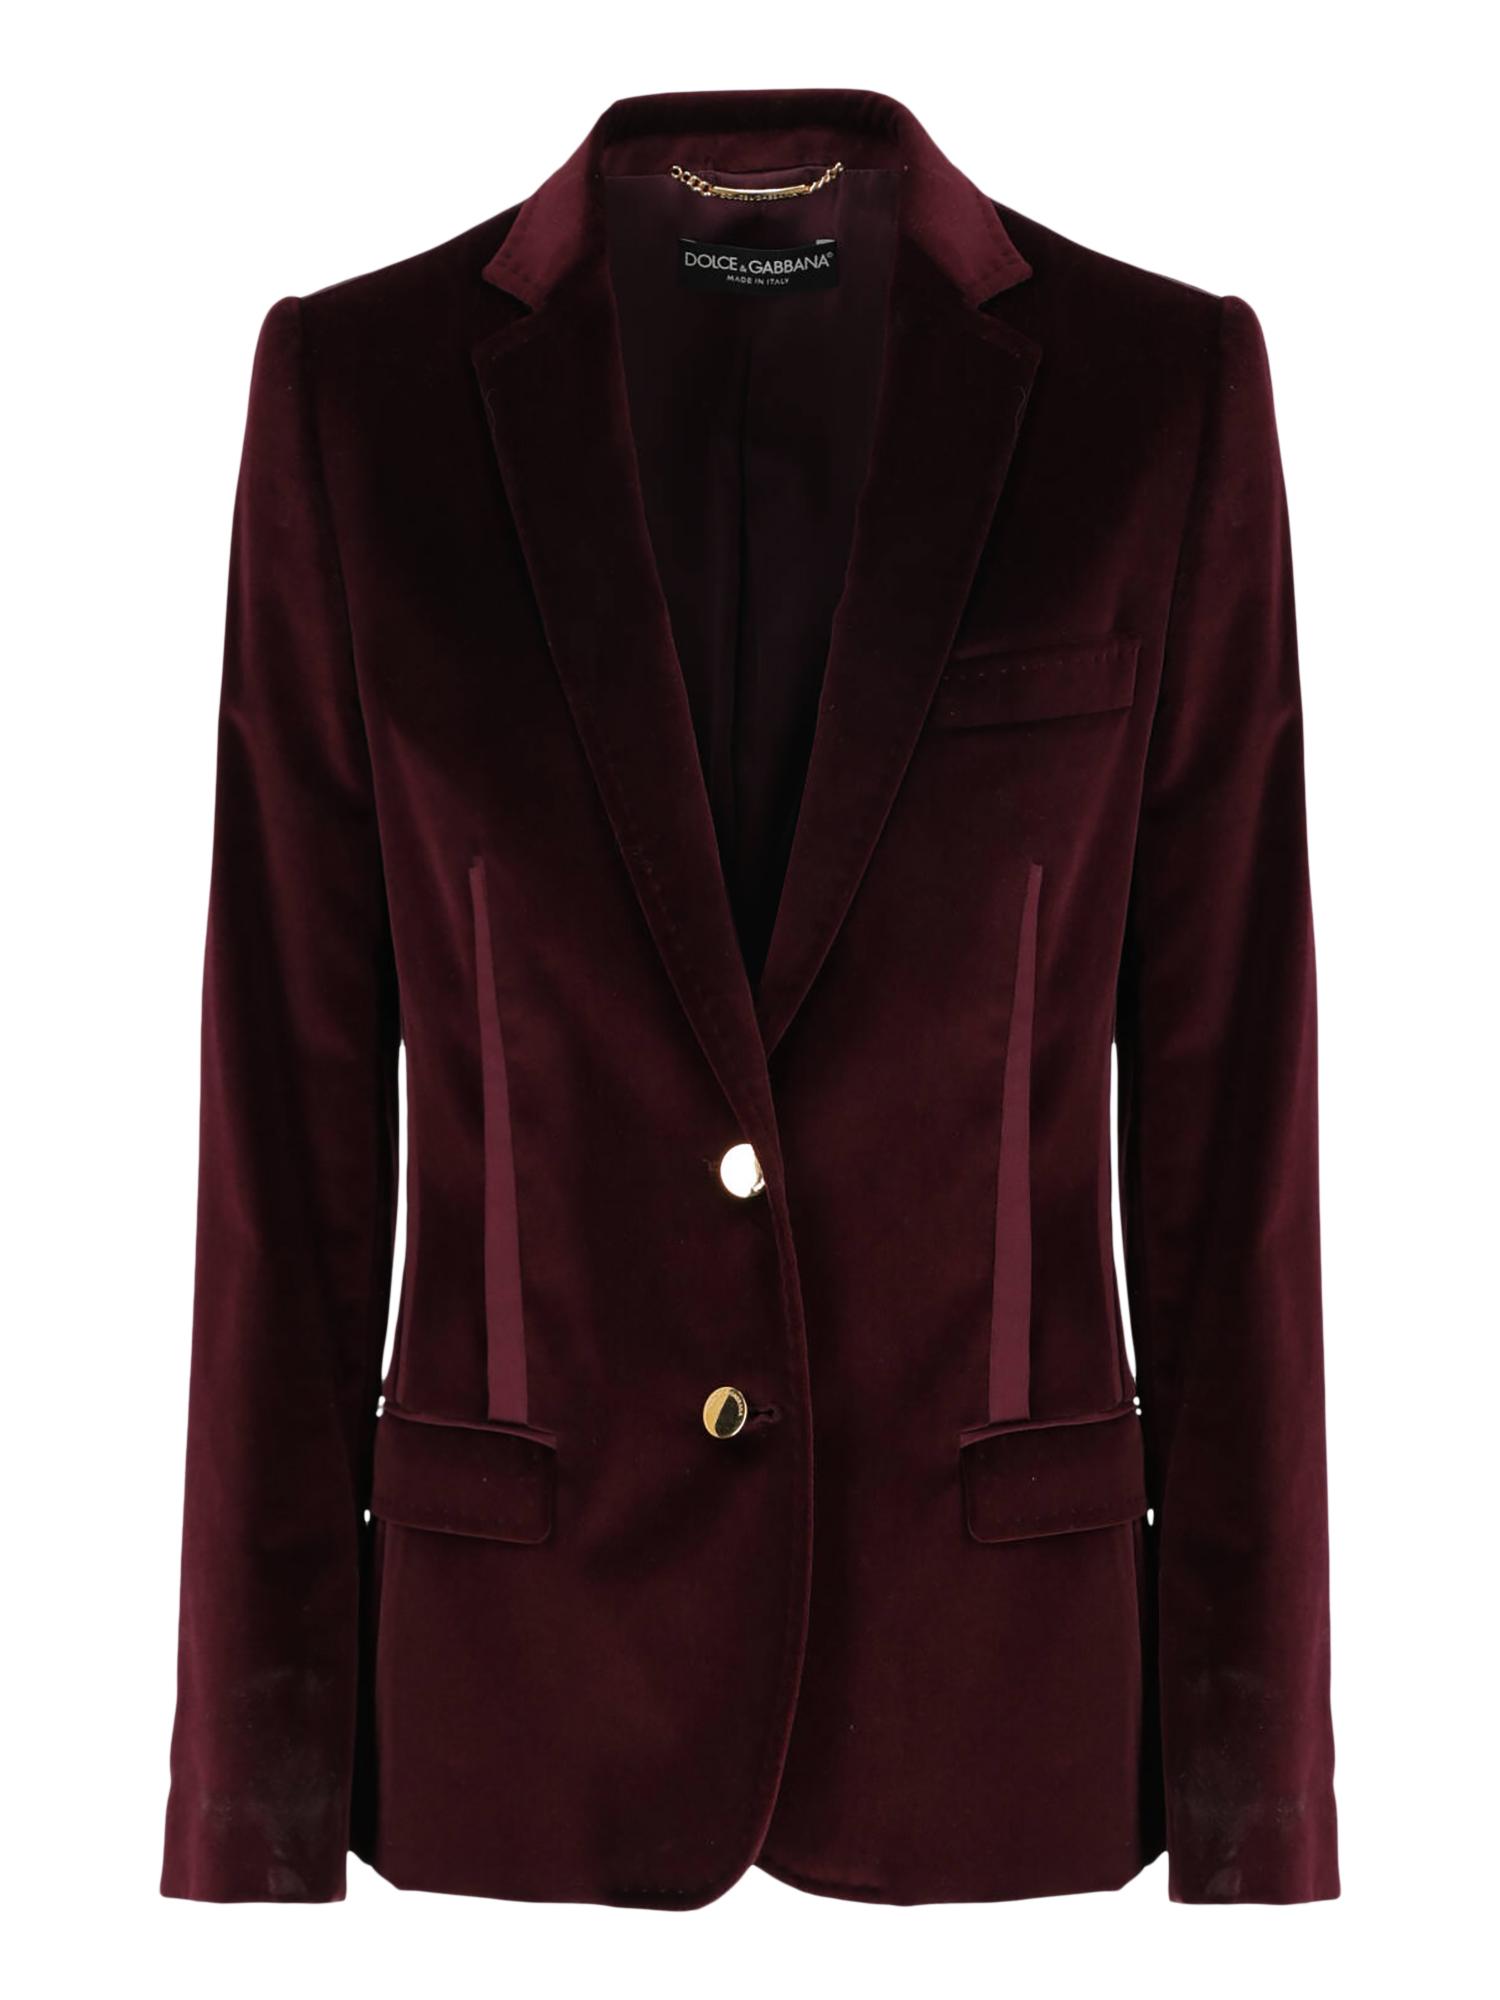 Pre-owned Dolce & Gabbana Women's Jackets -  - In Burgundy Cotton